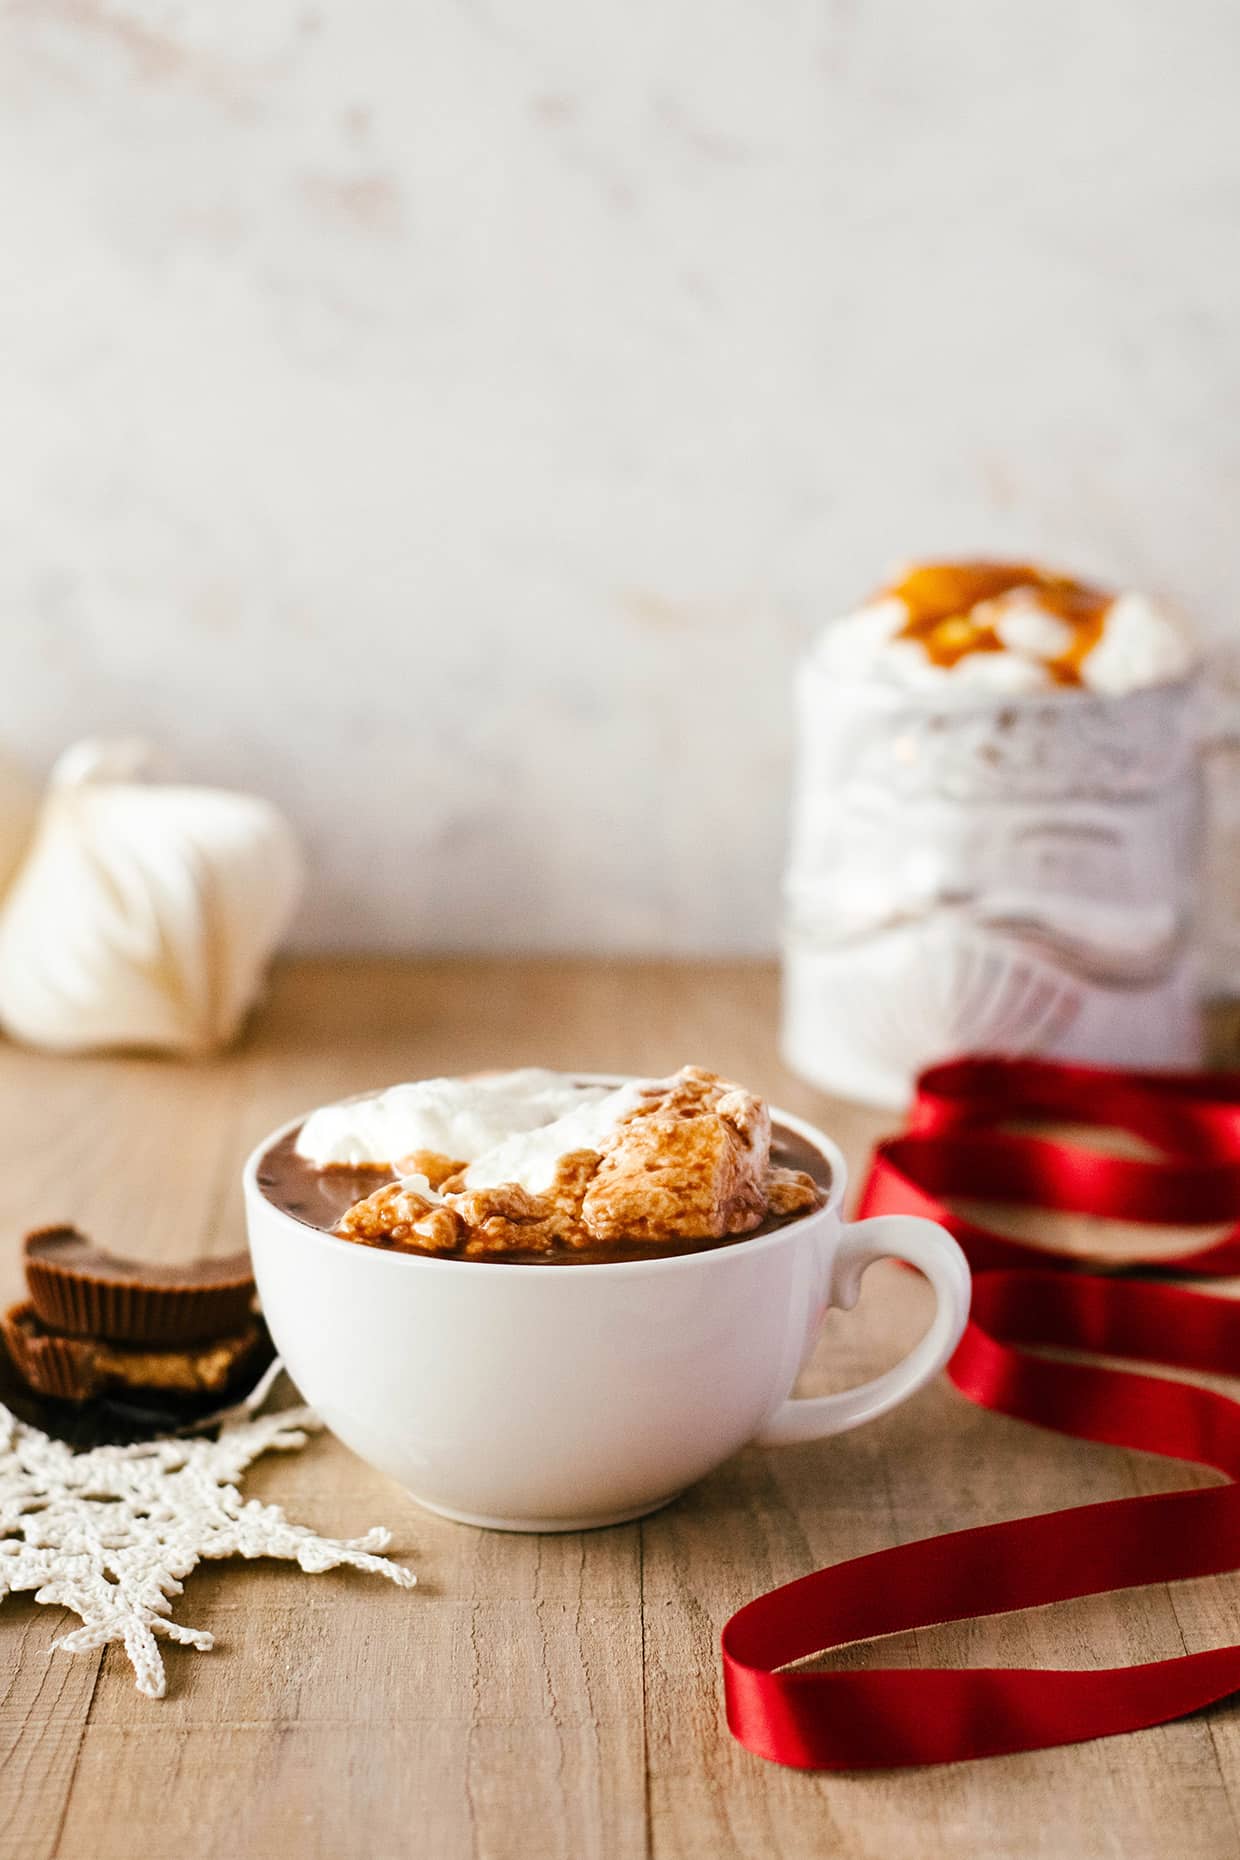 peanut butter cup hot chocolate with whipped cream and caramel